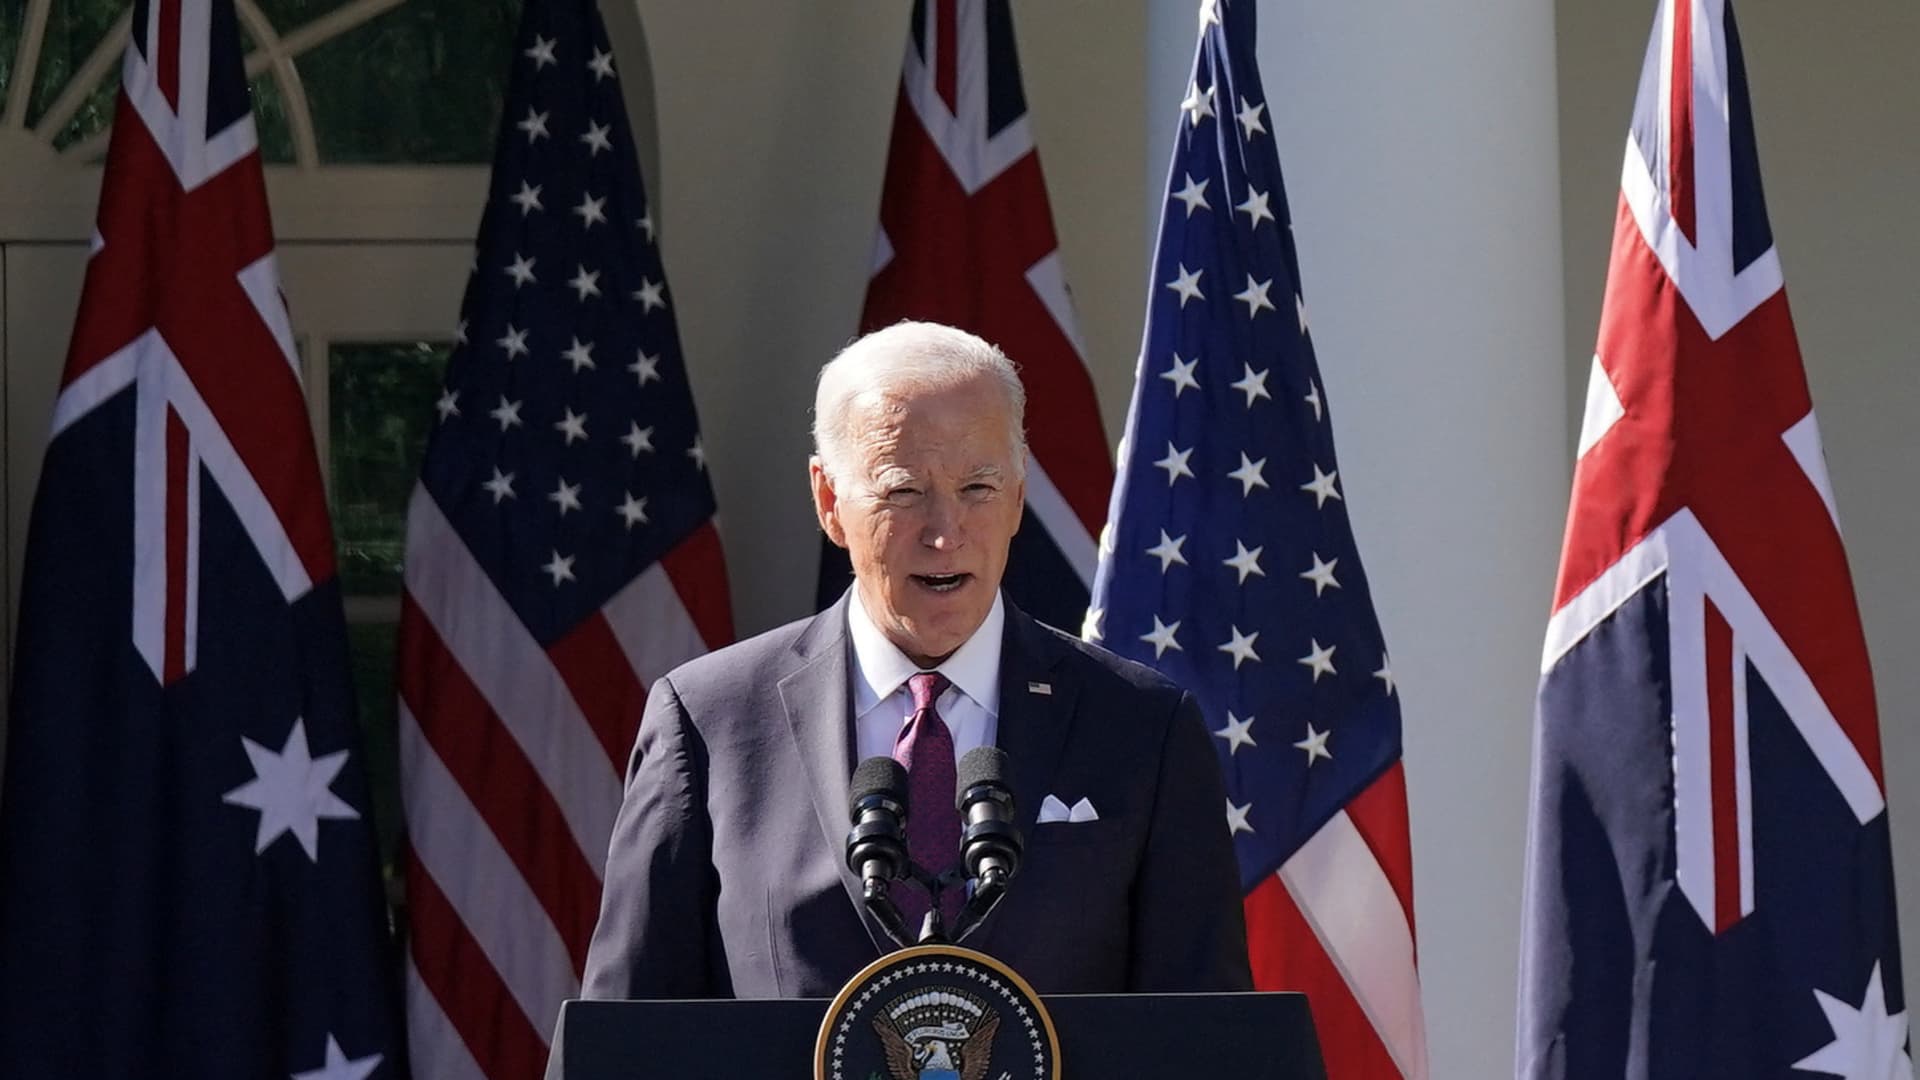 Biden: Israel-Hamas war must end with vision for a 'two-state solution'